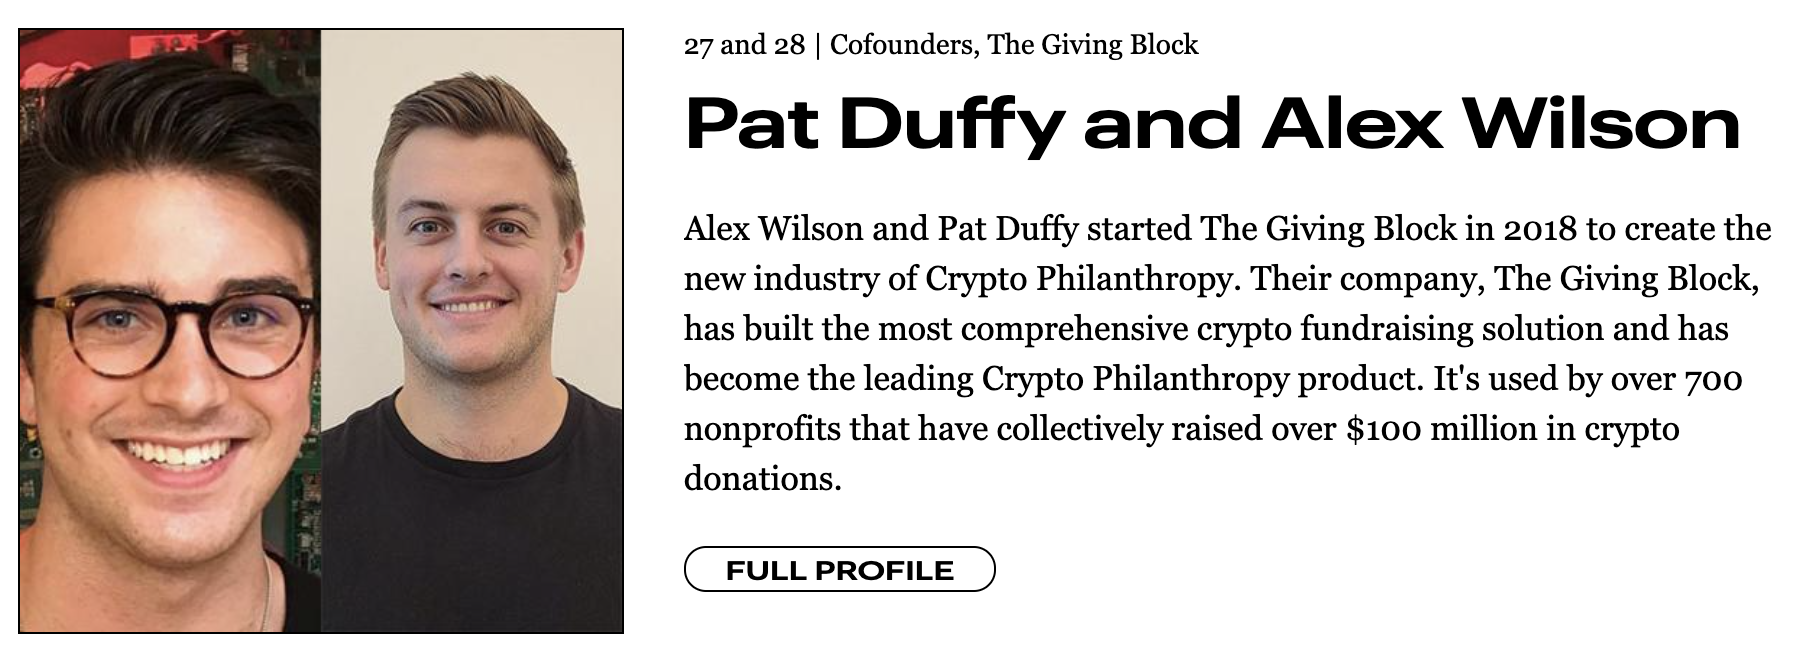 Screenshot of Forbes 30 Under 30 Profile of Pat Duffy and Alex Wilson